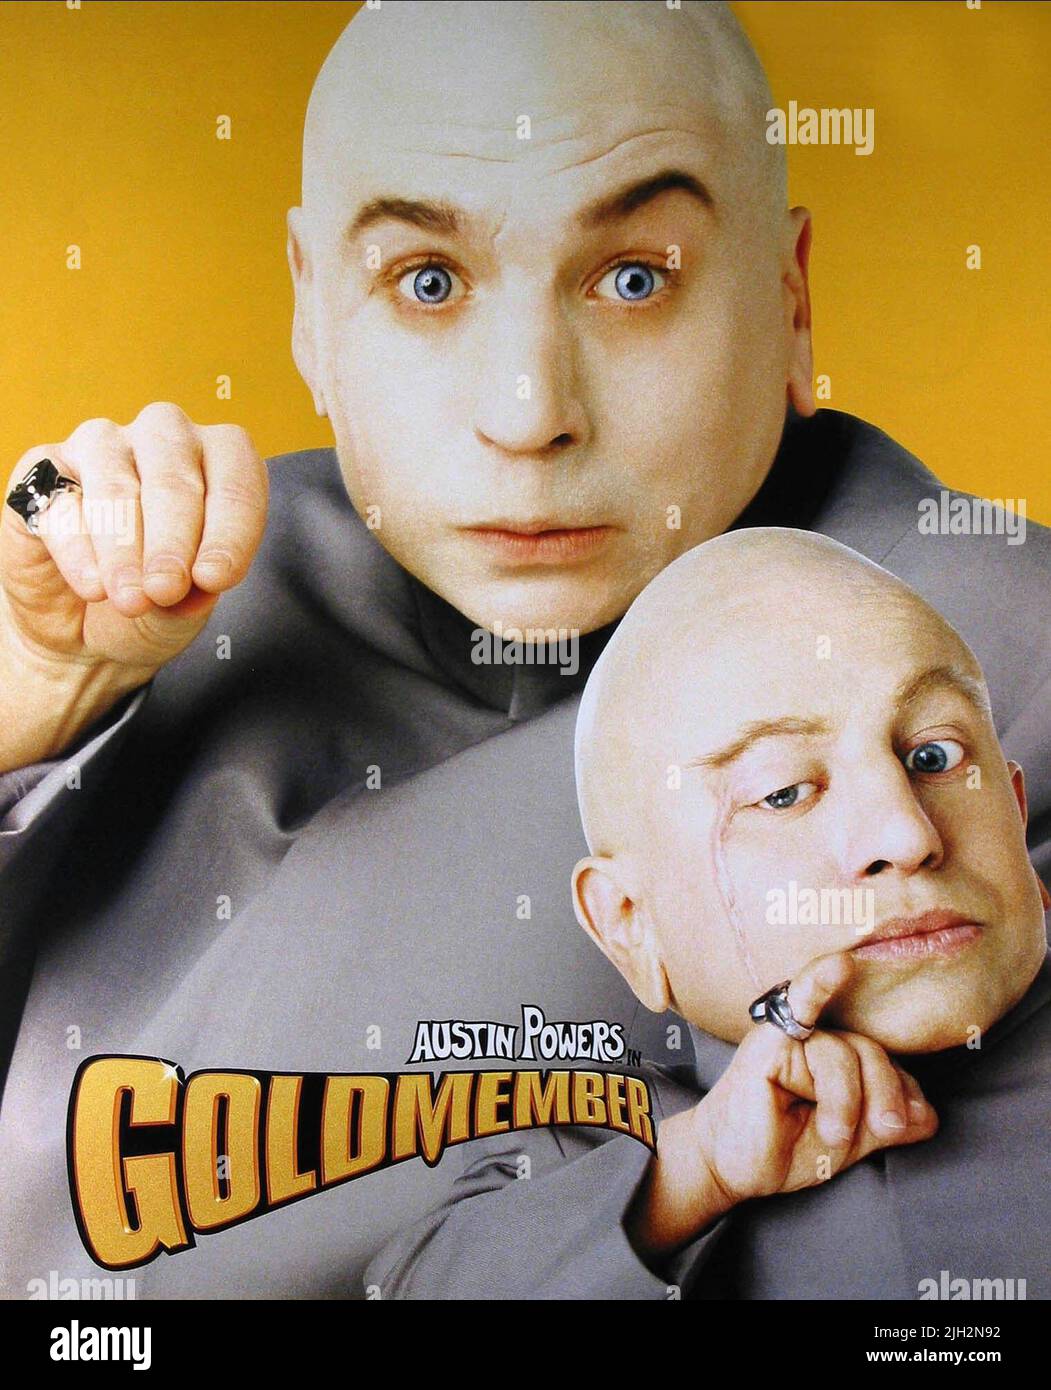 MYERS,TROYER, AUSTIN POWERS IN GOLDMEMBER, 2002 Stock Photo